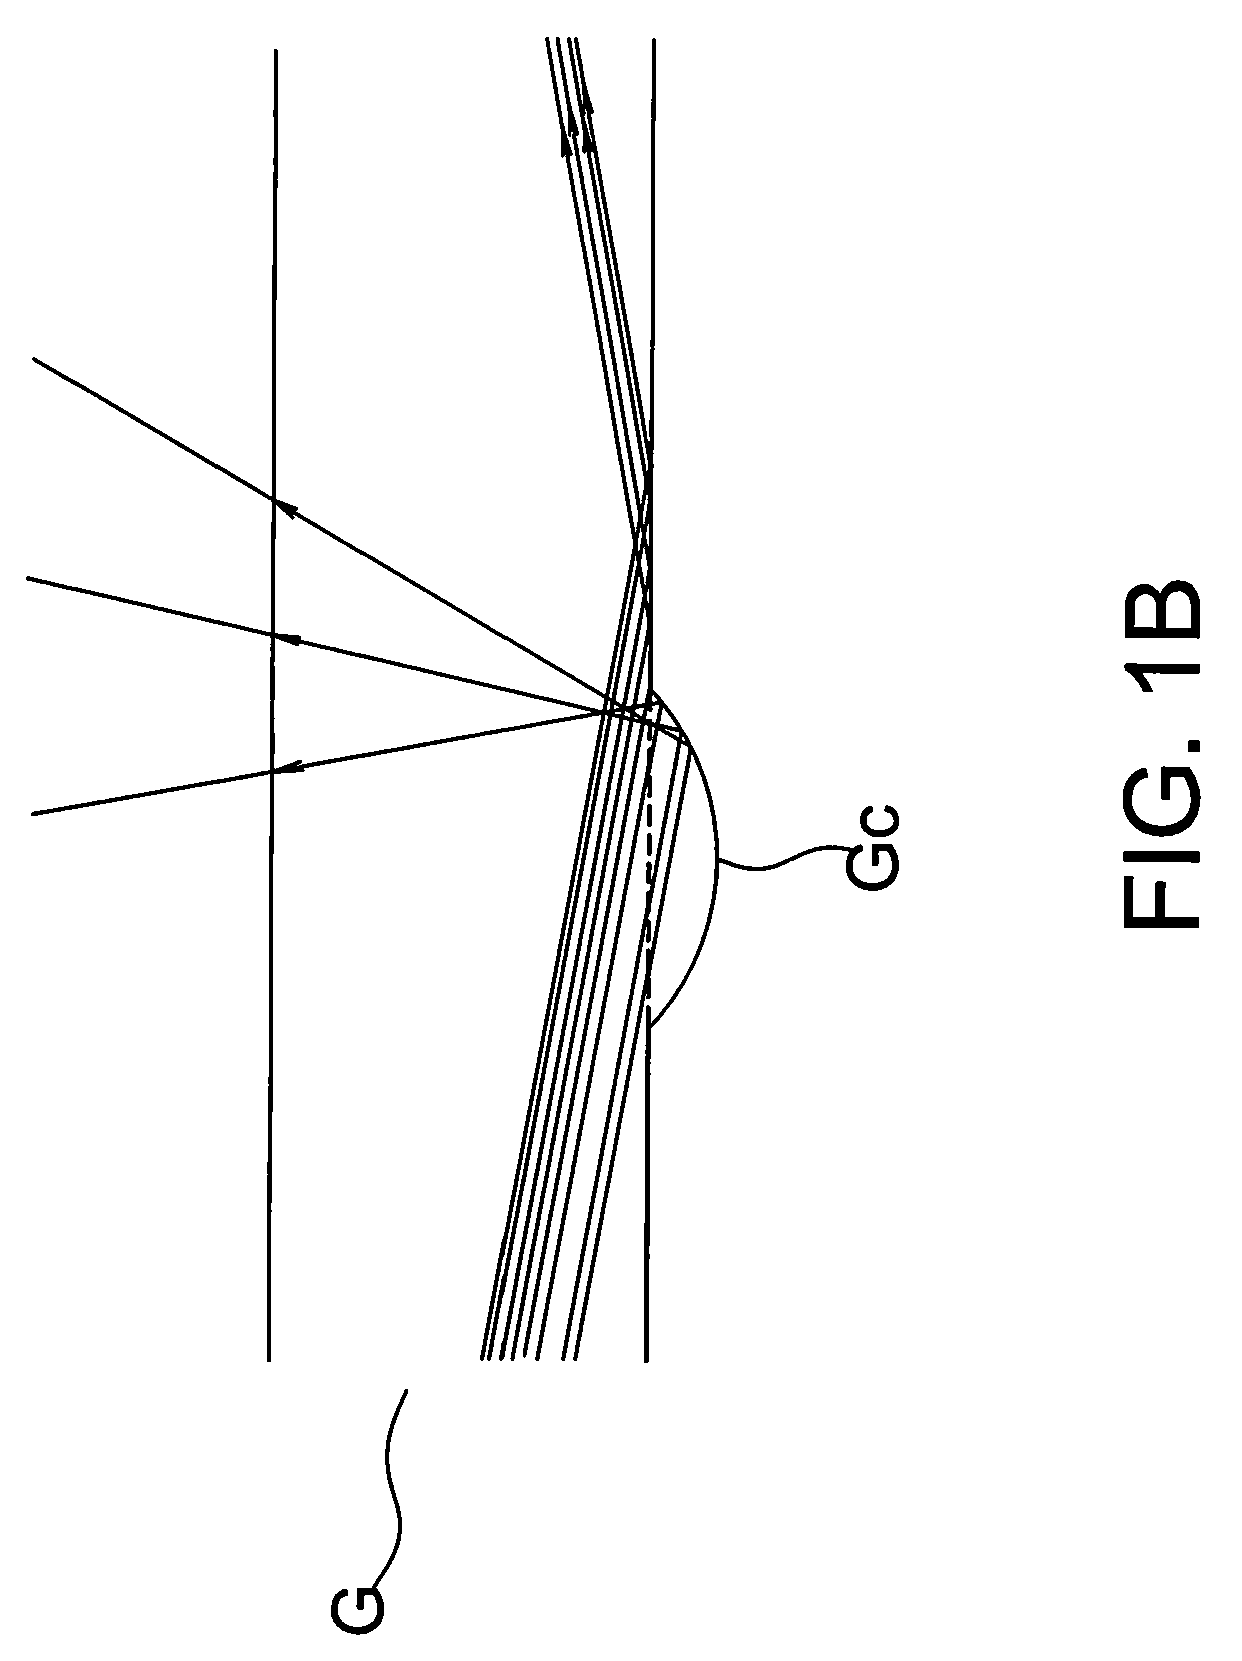 Light guide plate structure